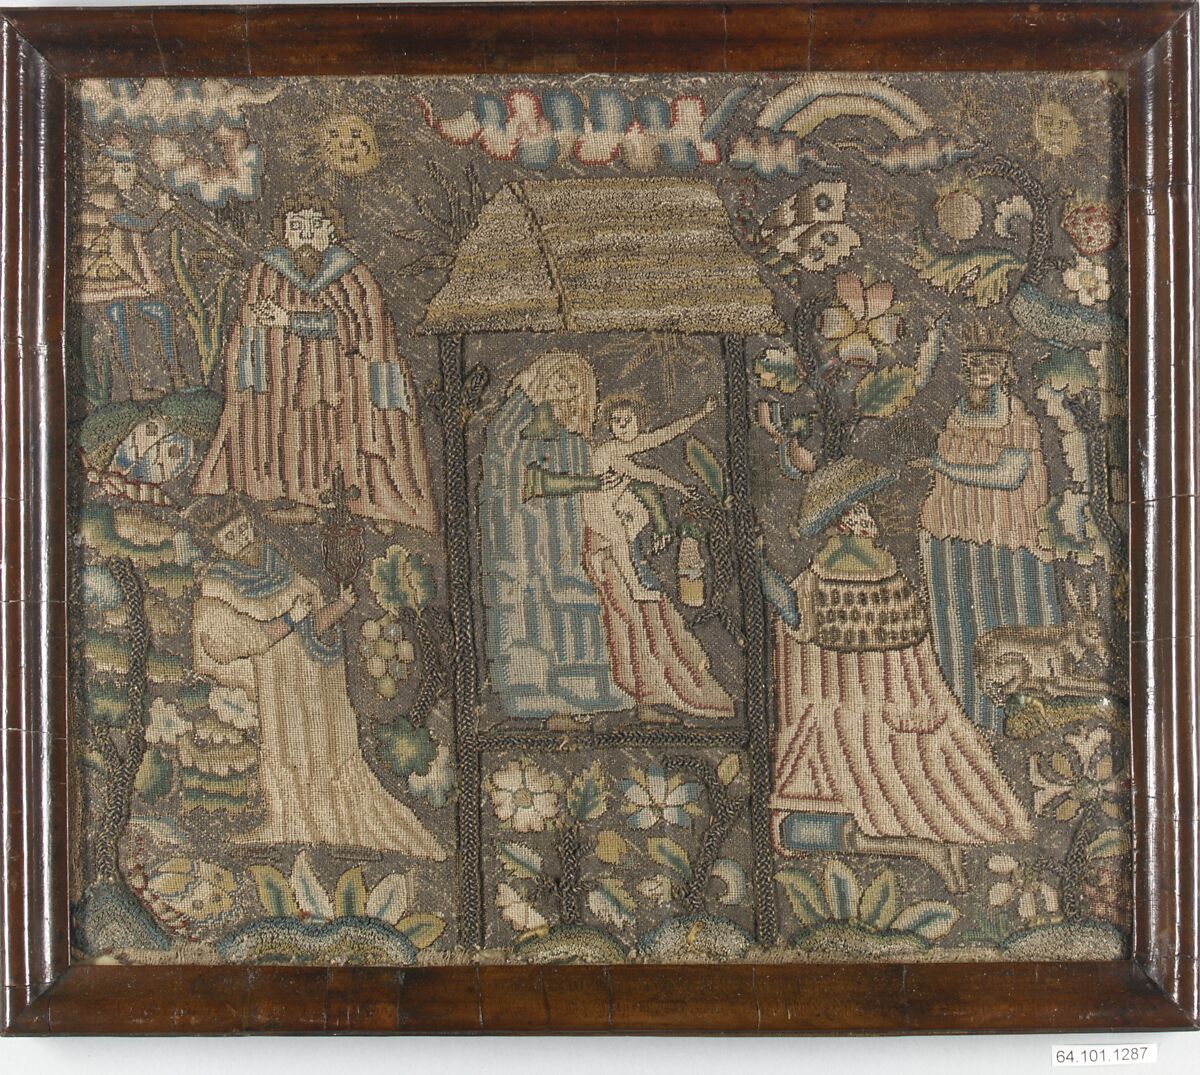 The Adoration of the Magi, Silk and metal thread on canvas, British 